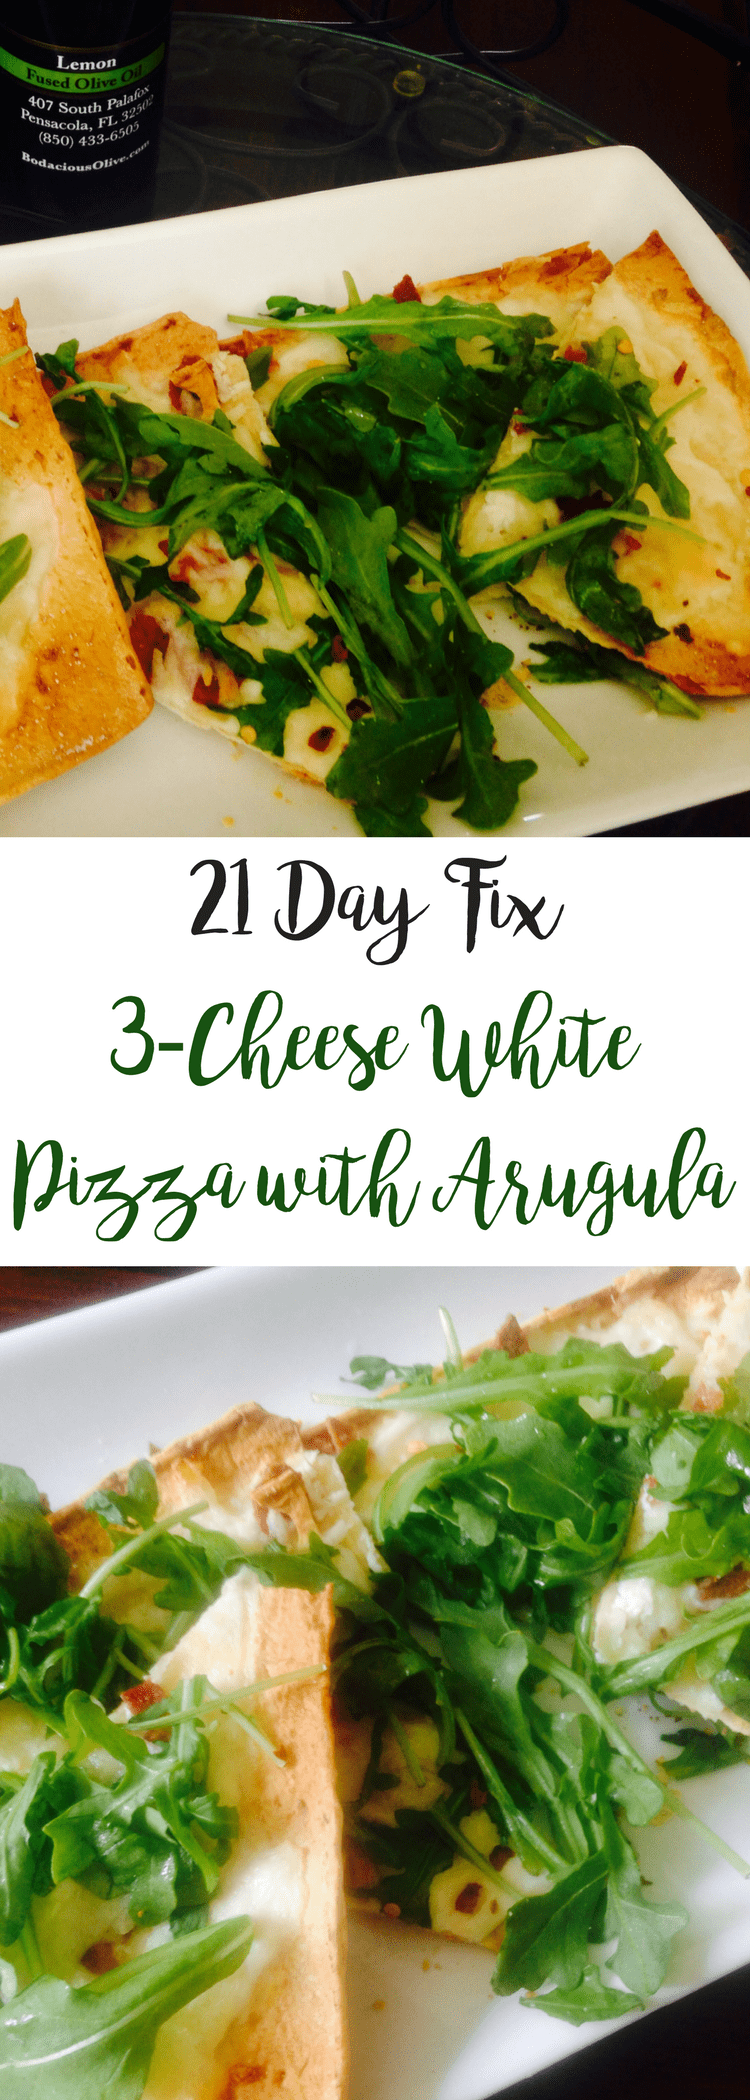 3-Cheese White Pizza with Arugula {21 Day Fix} | Confessions of a Fit Foodie 